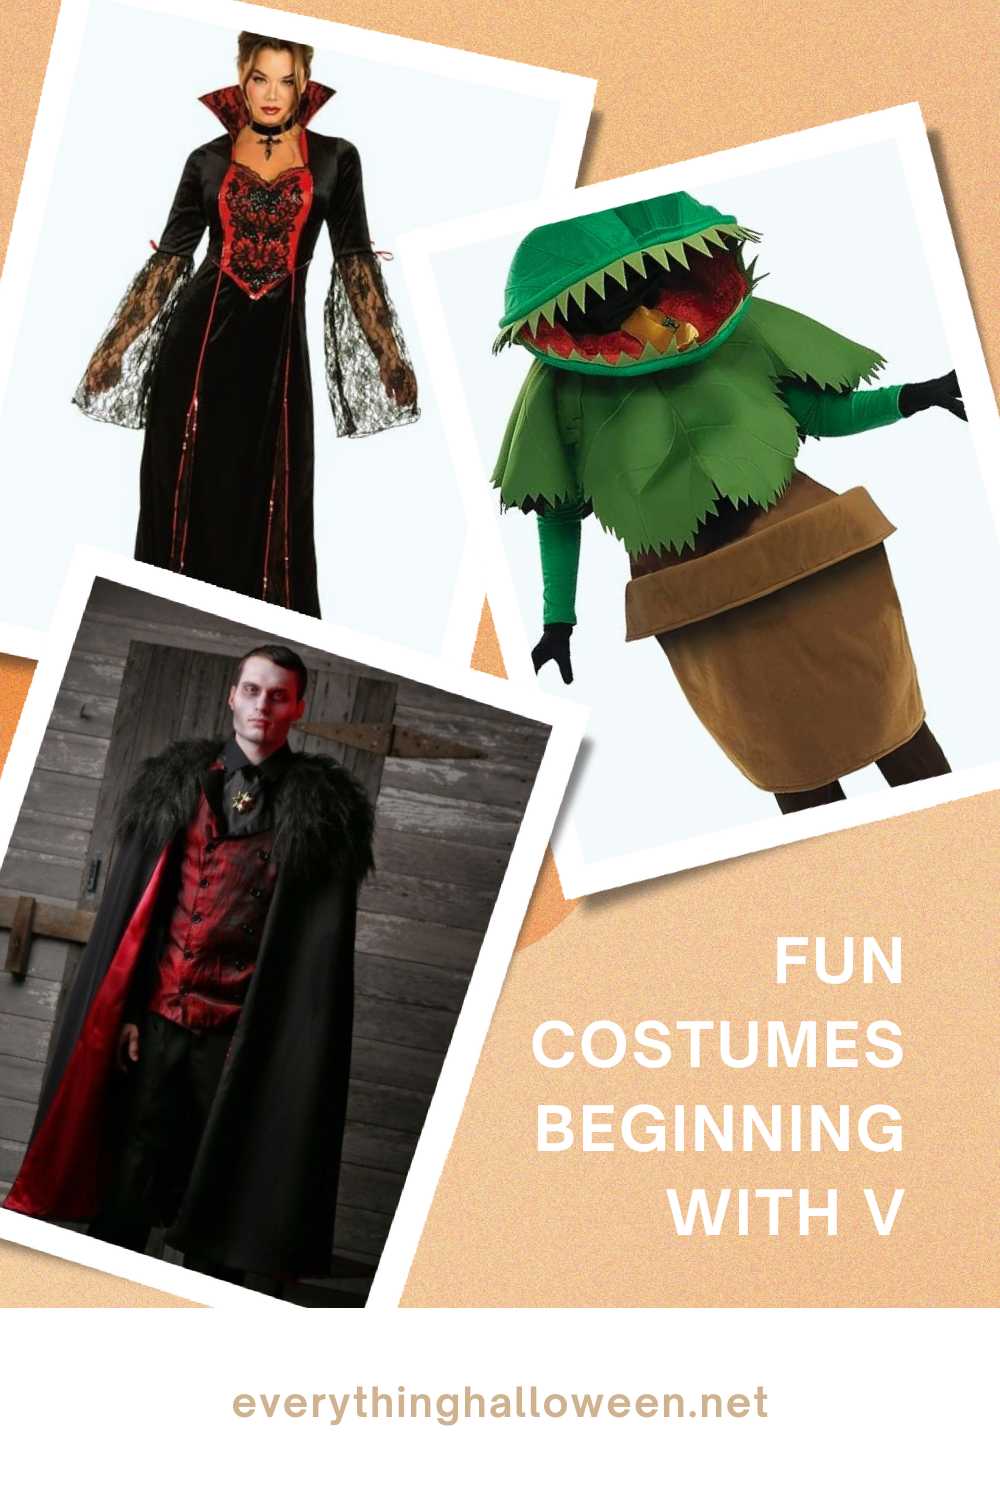 Vampires and Venus Flytraps are just a few fun costumes that begin with V